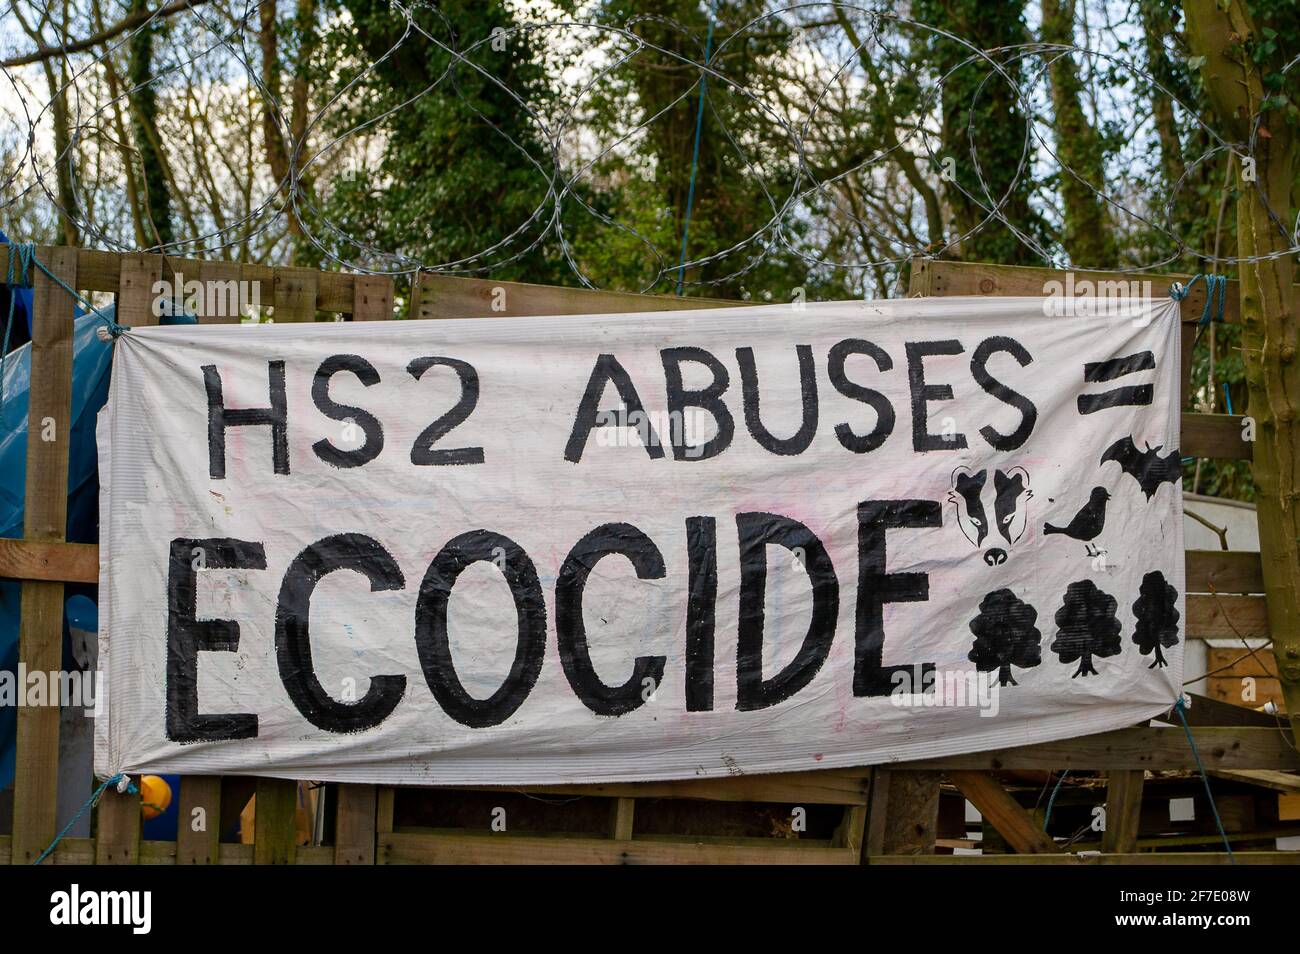 Aylesbury Vale, UK. 6th April, 2021. An HS2 Abuses = Ecocide banner outside the W.A.R Against HS2 camp. Locals and environmentalists are furious about the devestation HS2 is causing to the Chilterns which is an AONB. The High Speed 2 railway from London to Birmingham is having a huge detrimental impact upon wildlife and the environment. Credit: Maureen McLean/Alamy Stock Photo